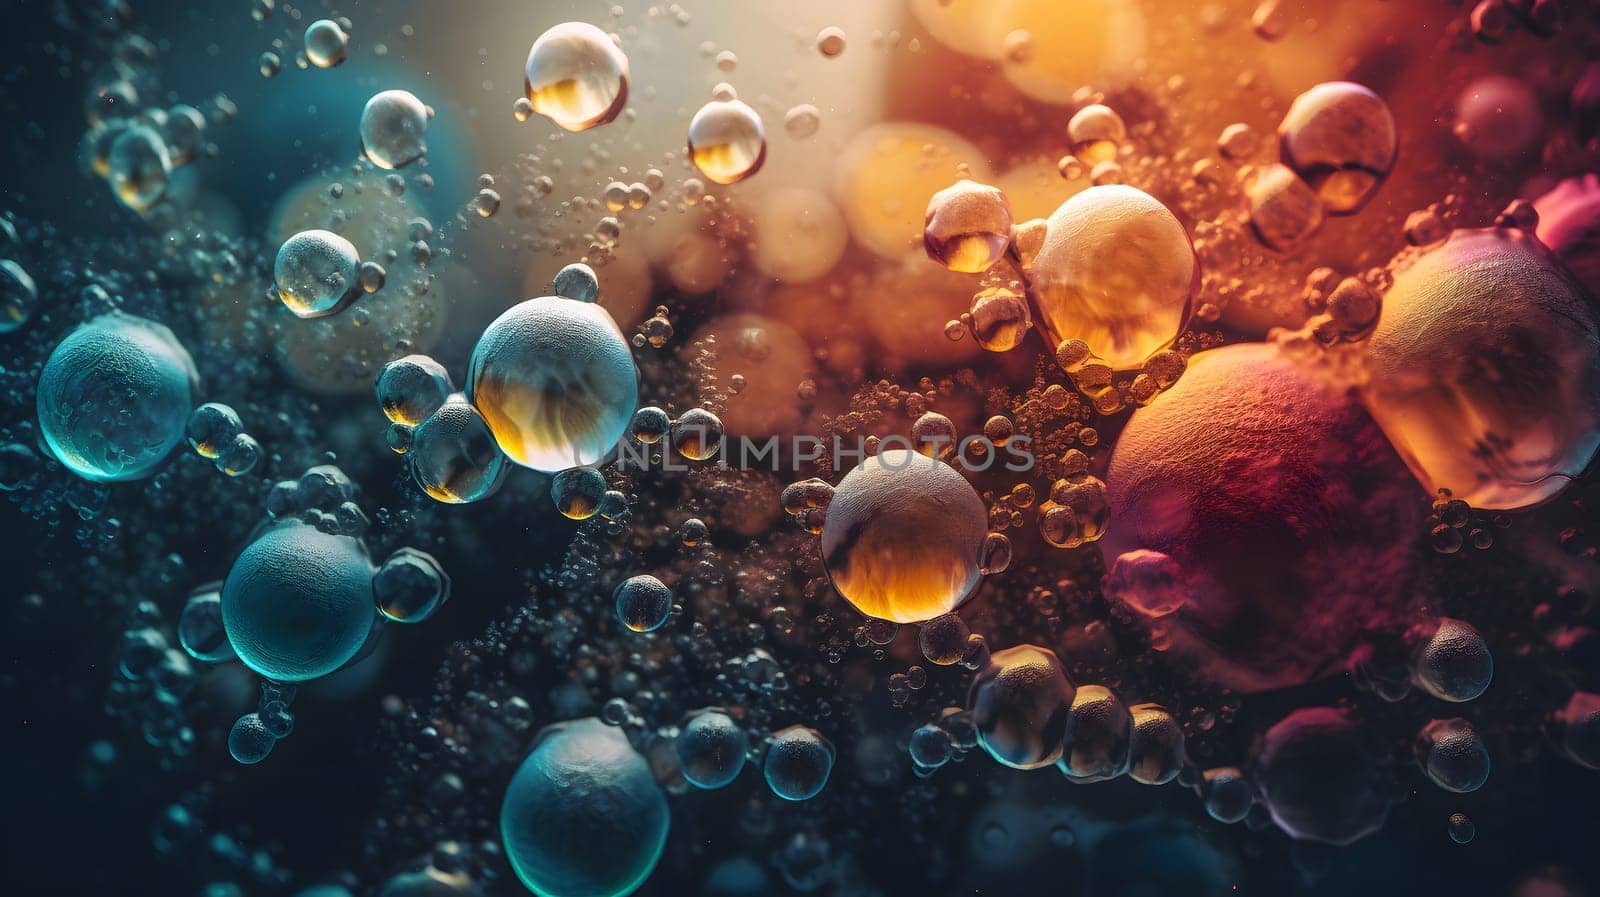 abstract background and wallpaper of clolorful bubbles in teal-orange tones, neural network generated image by z1b